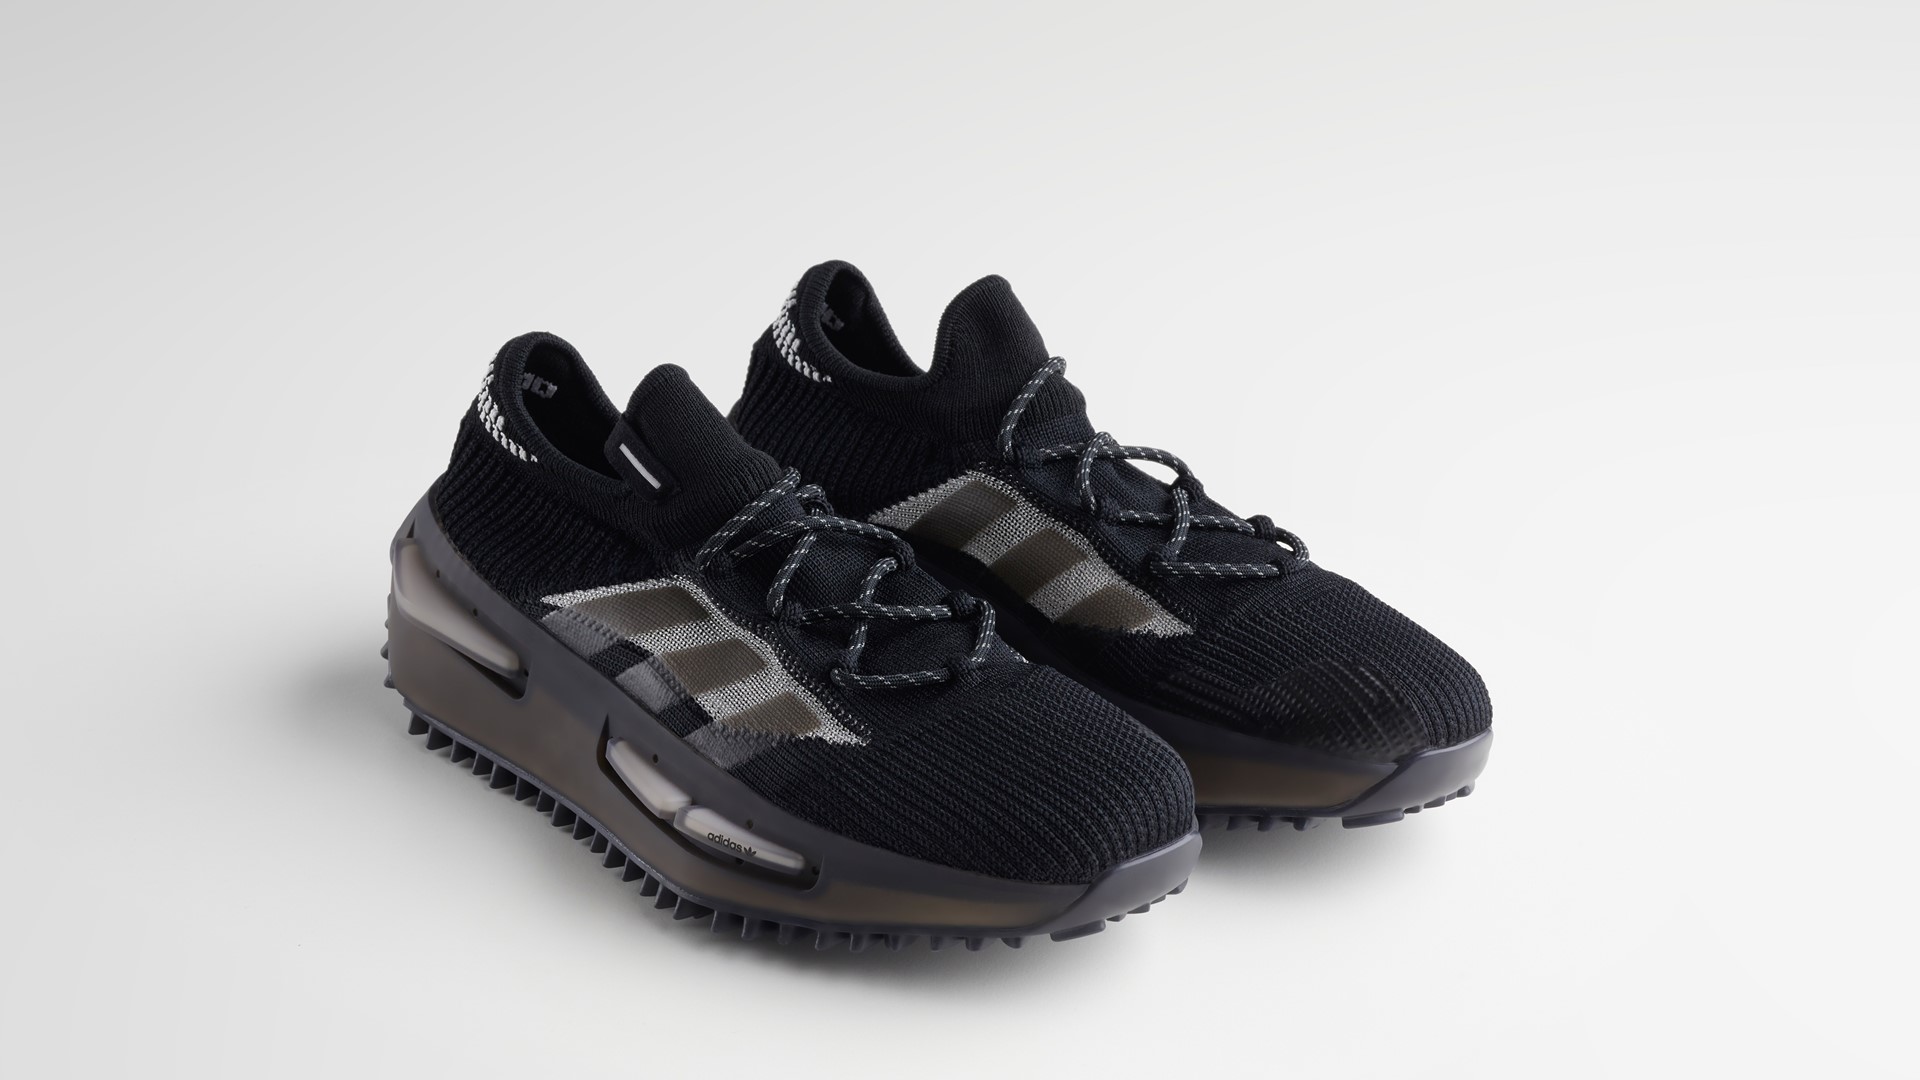 Elegance Postimpressionisme venlige adidas Originals Launches a Brand New Black Colorway of the NMD S1  Silhouette